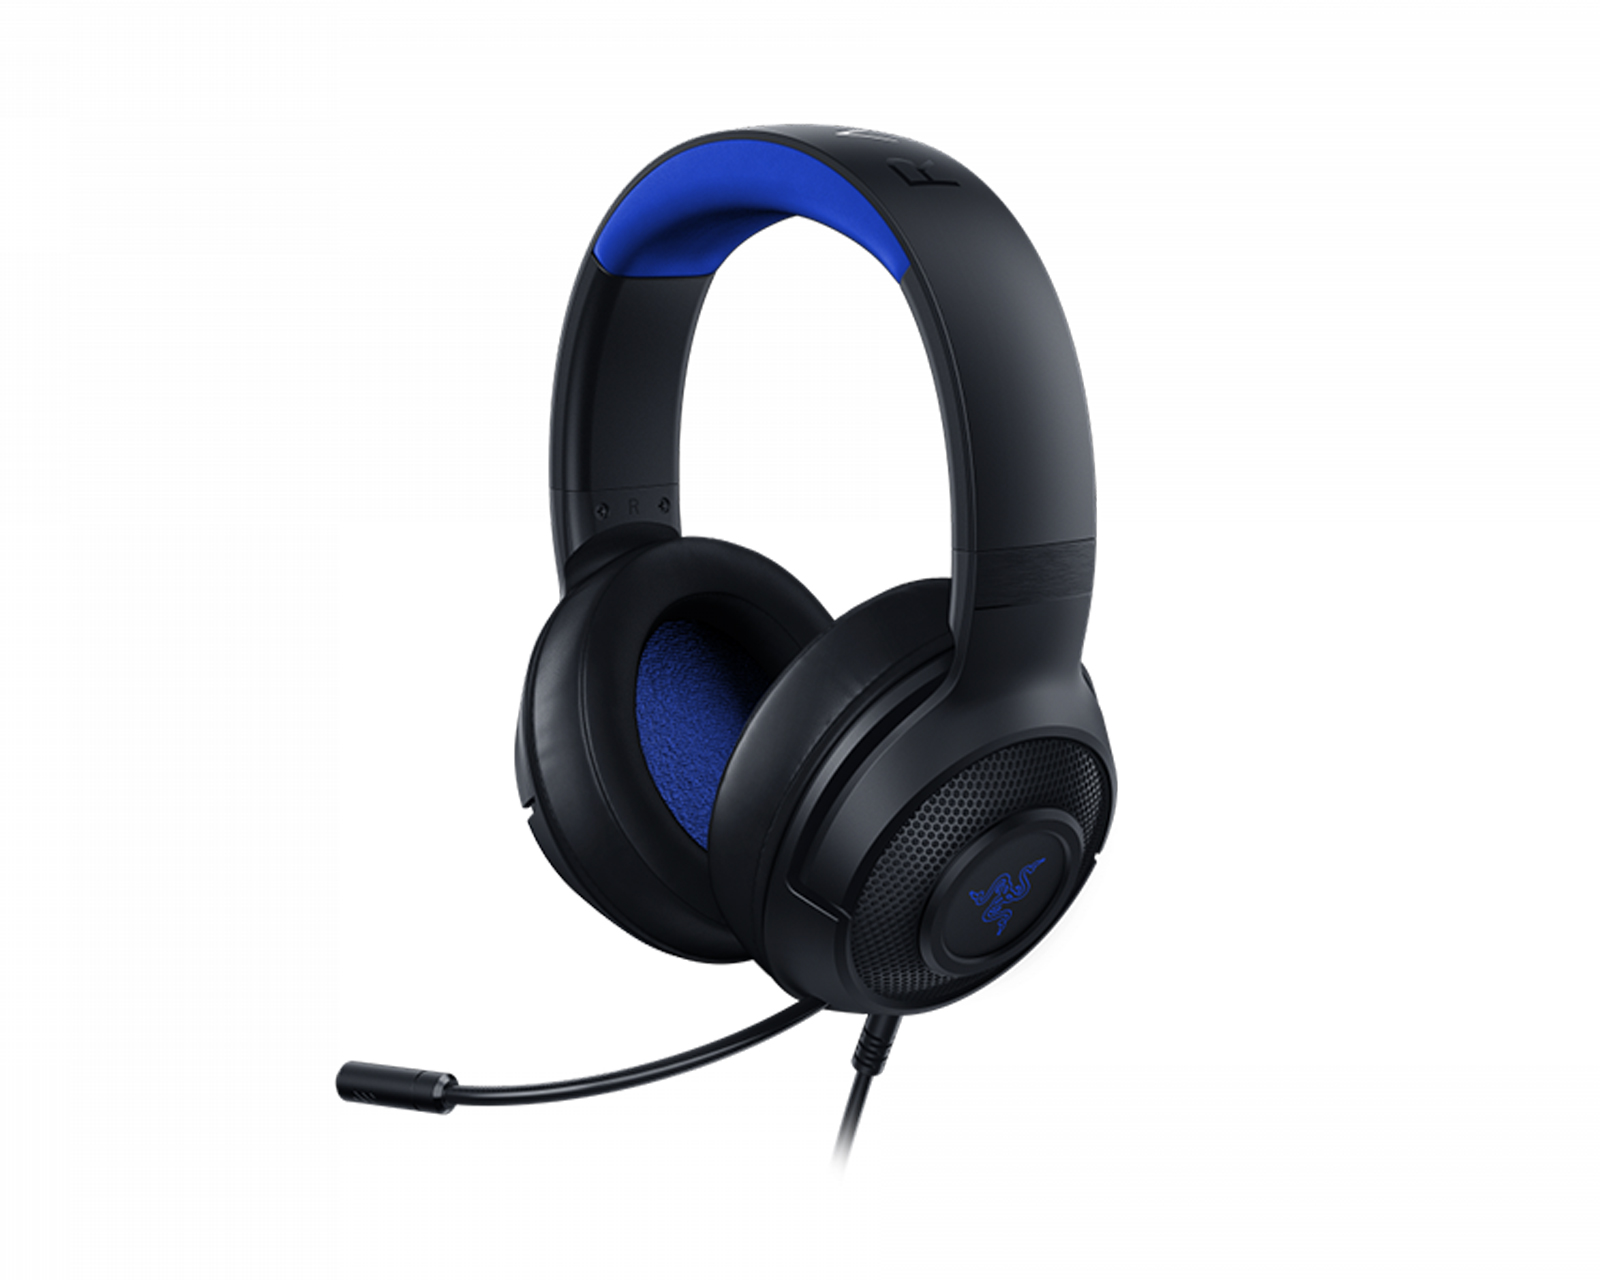 Console Gaming Headset - Razer Kraken for Console